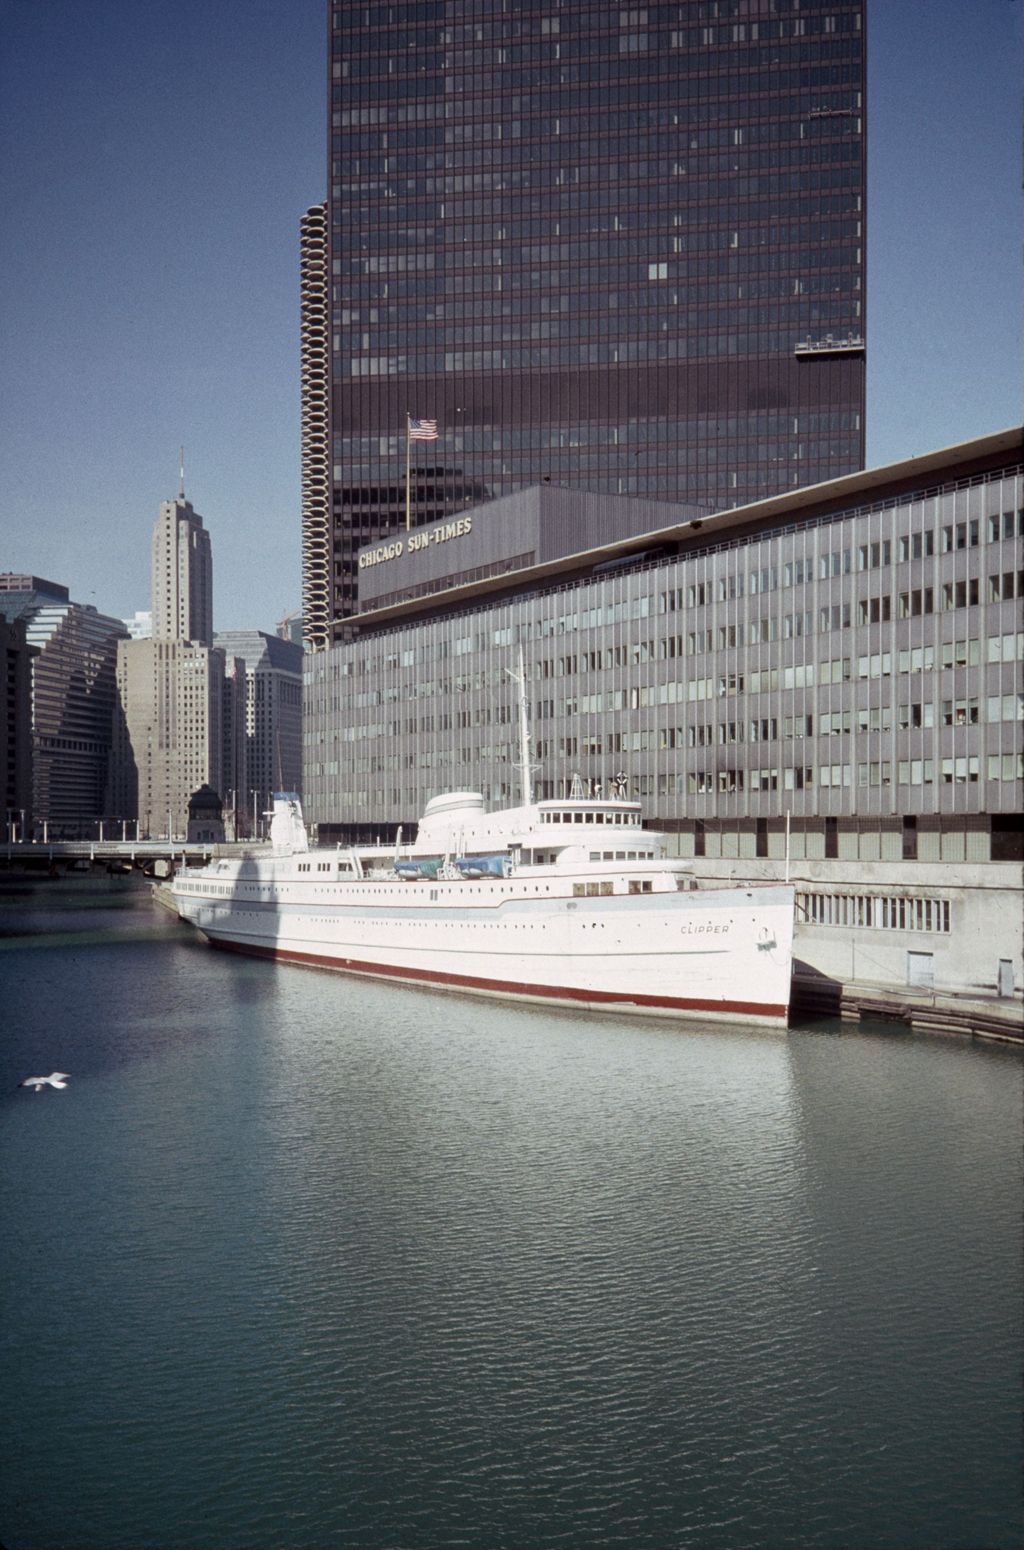 Miniature of Chicago River and Sun-Times Building